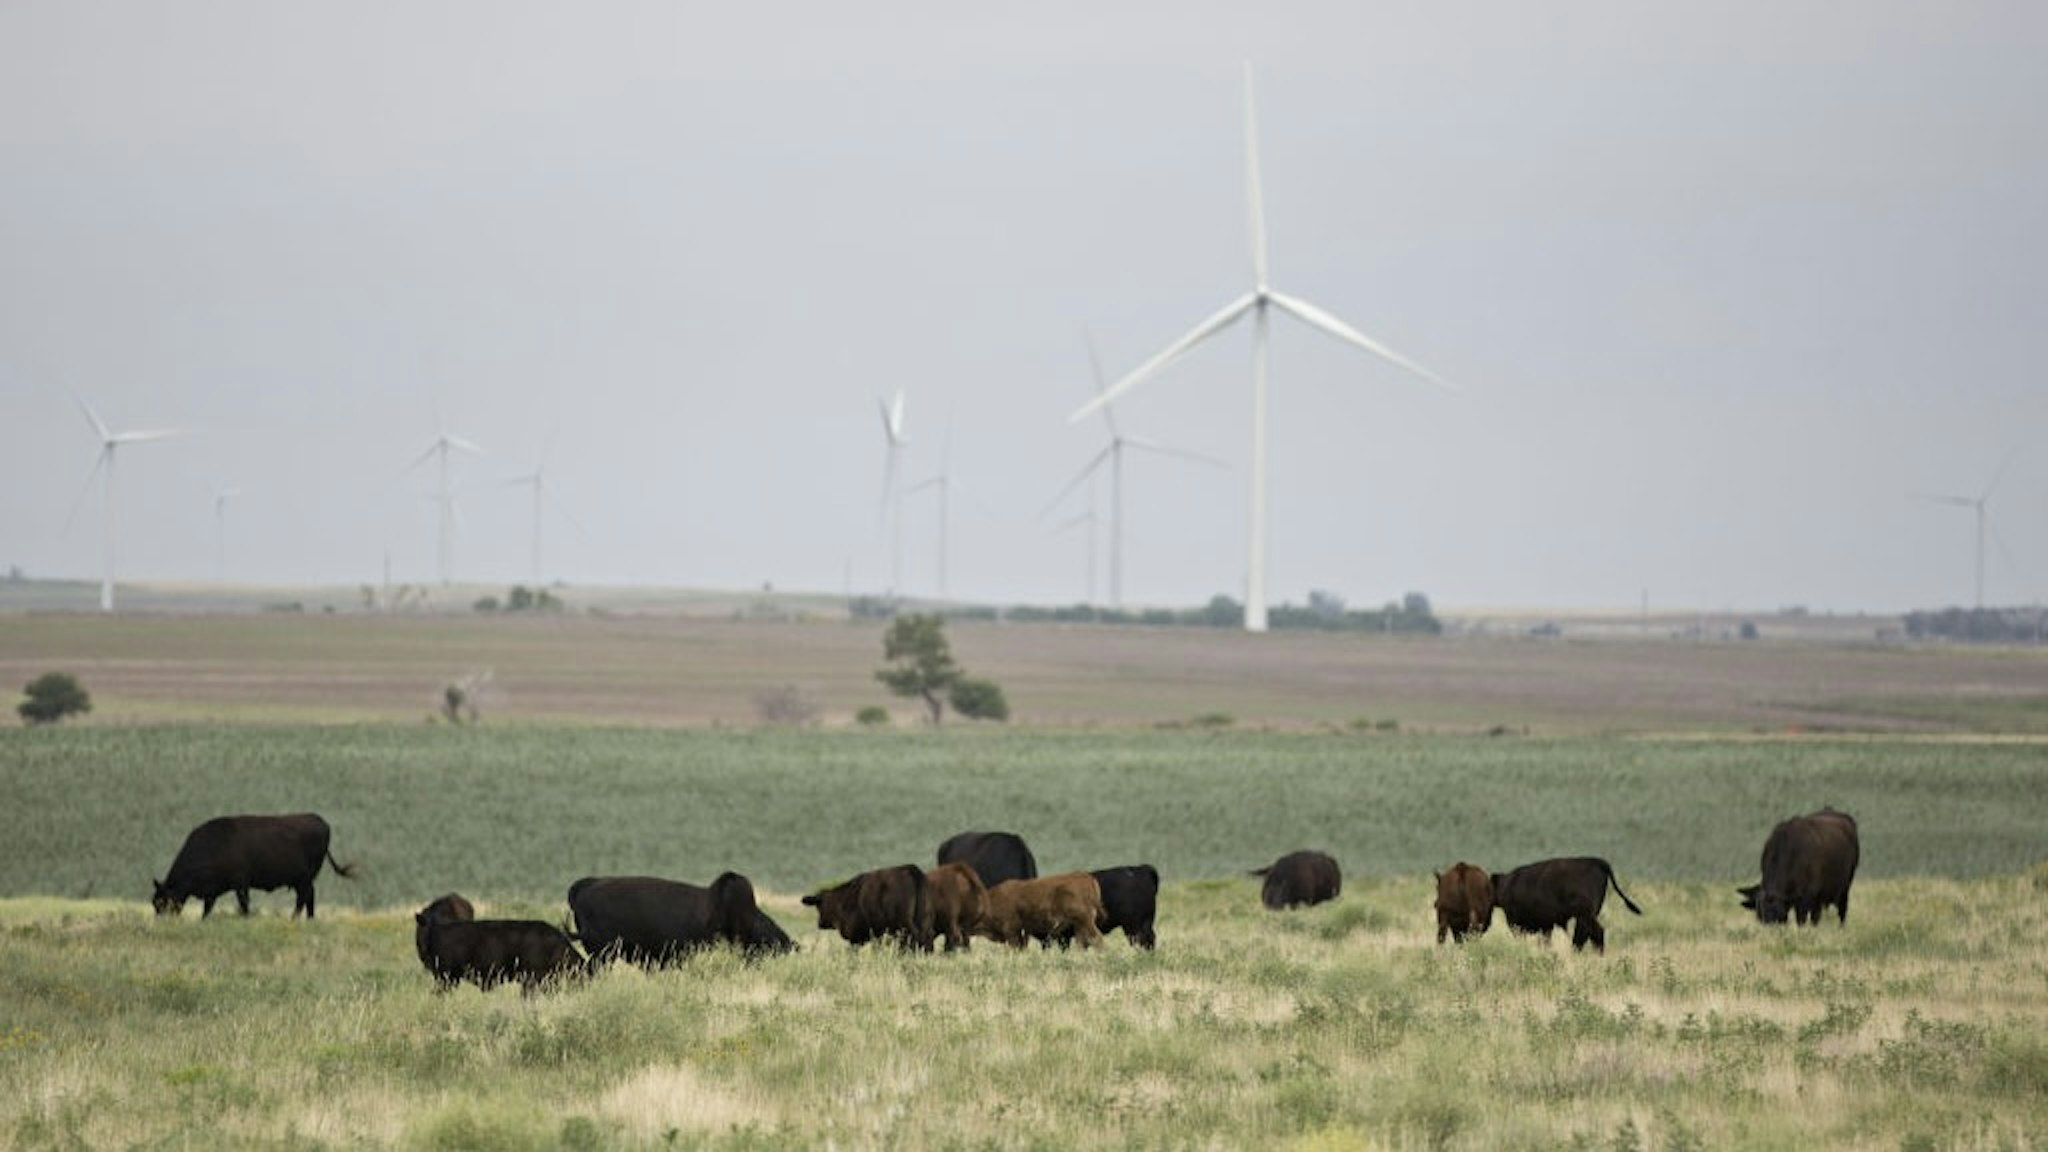 Turbines At The Invenergy LLC Buckeye Wind Energy Center As Renewables Top Nukes In U.S. Power Cattle graze near wind turbines at the Invenergy LLC Buckeye Wind Energy Center in Hays, Kansas, U.S., on Thursday, June 29, 2017. For the first time in more than 30 years, America's nuclear plants have fallen behind wind farms, solar panels and other renewable energy suppliers as a source of electricity. Photographer: Daniel Acker/Bloomberg via Getty Images Bloomberg / Contributor